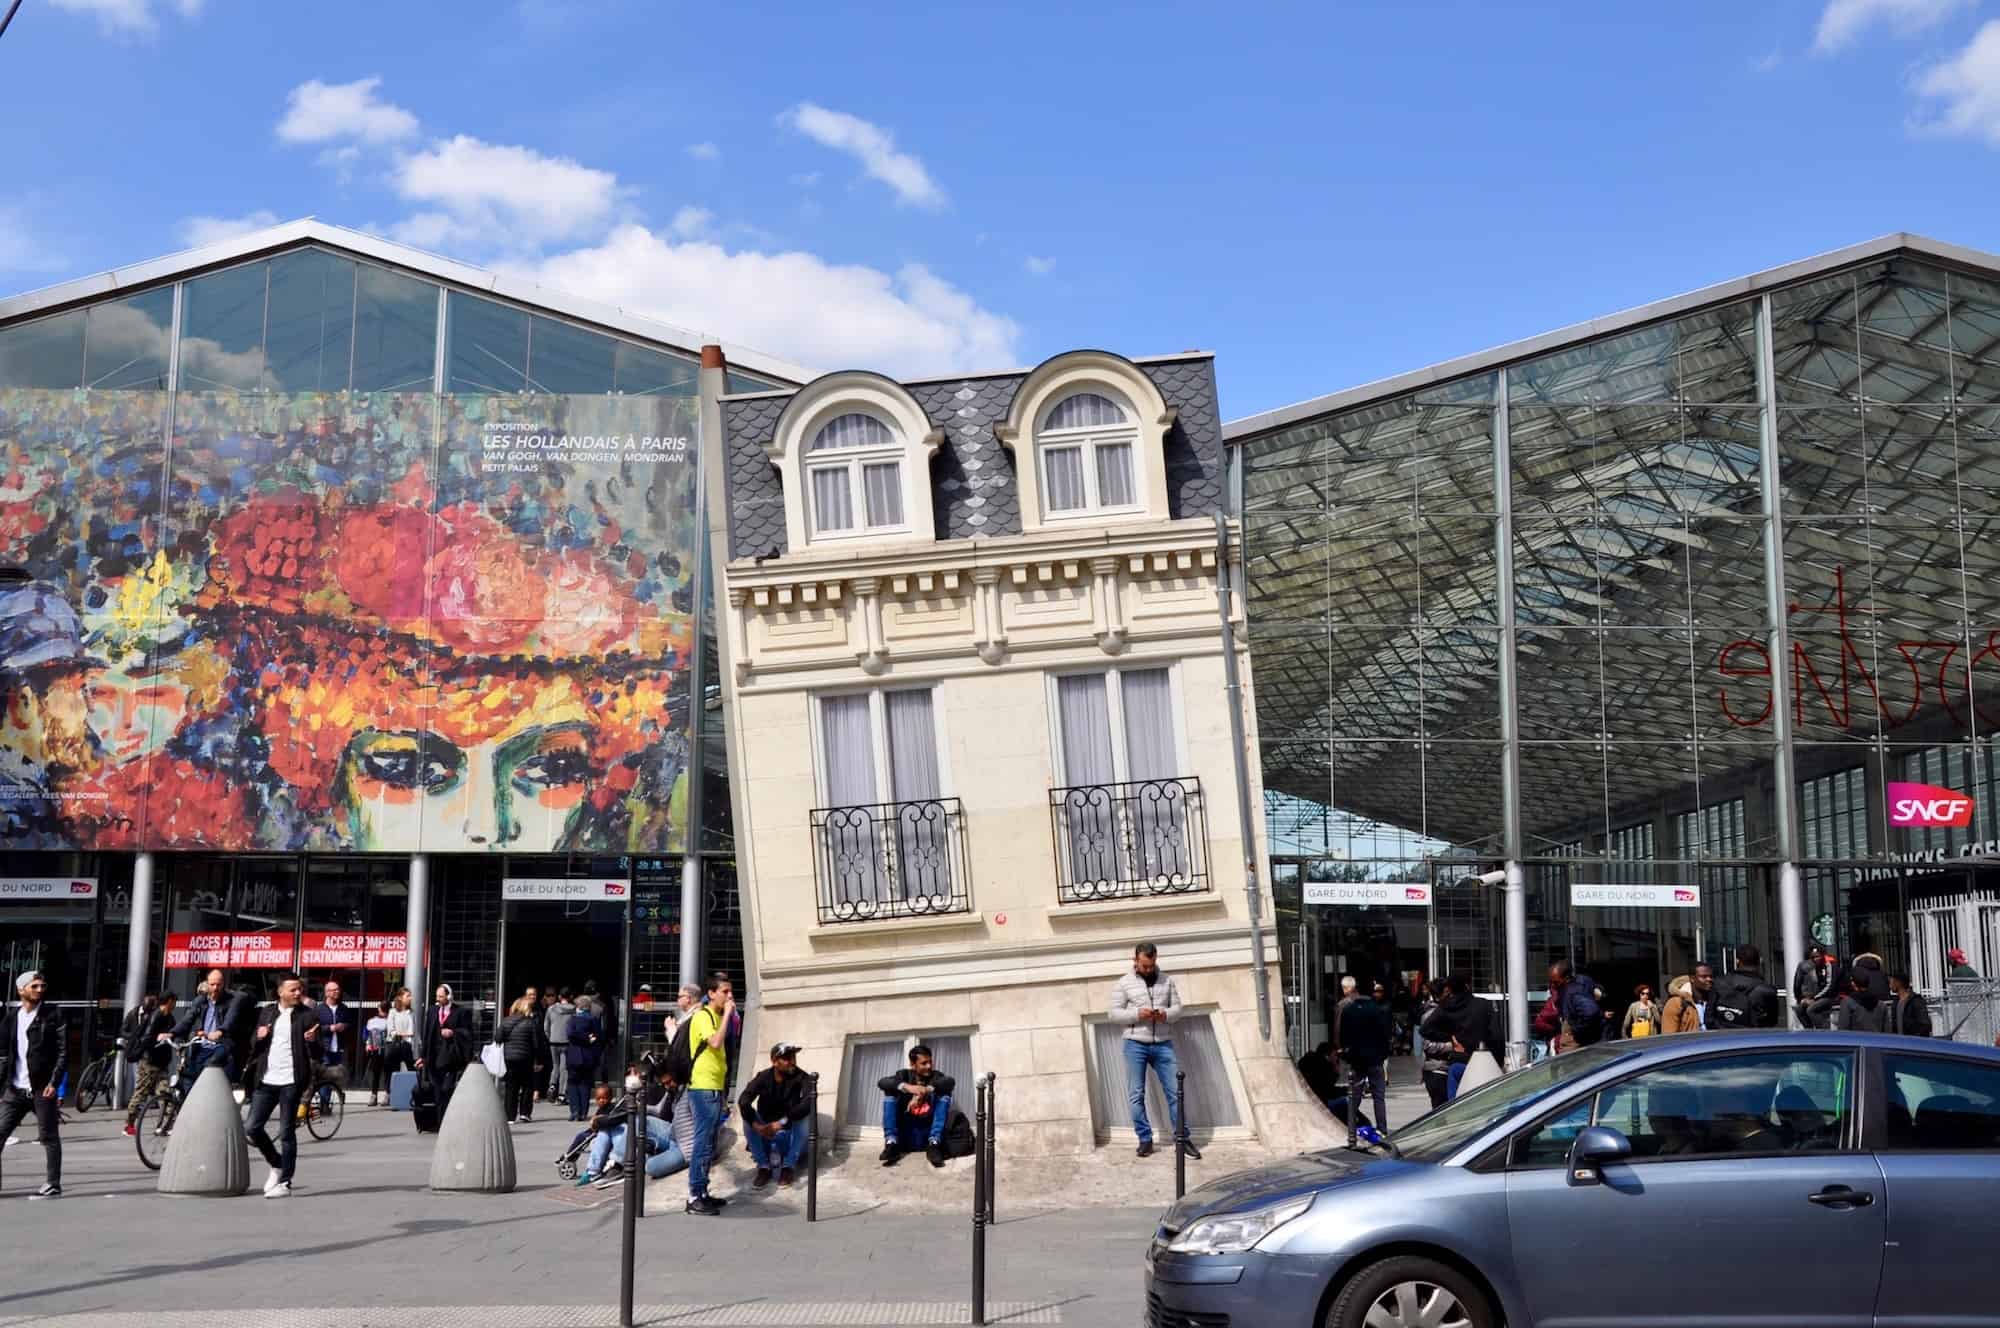 You'll find art in Paris even at Gare du Nord station, where artist Leandro Erlich created a crooked house, like an iceberg sinking, which aims to highlight the problems of global warming. 